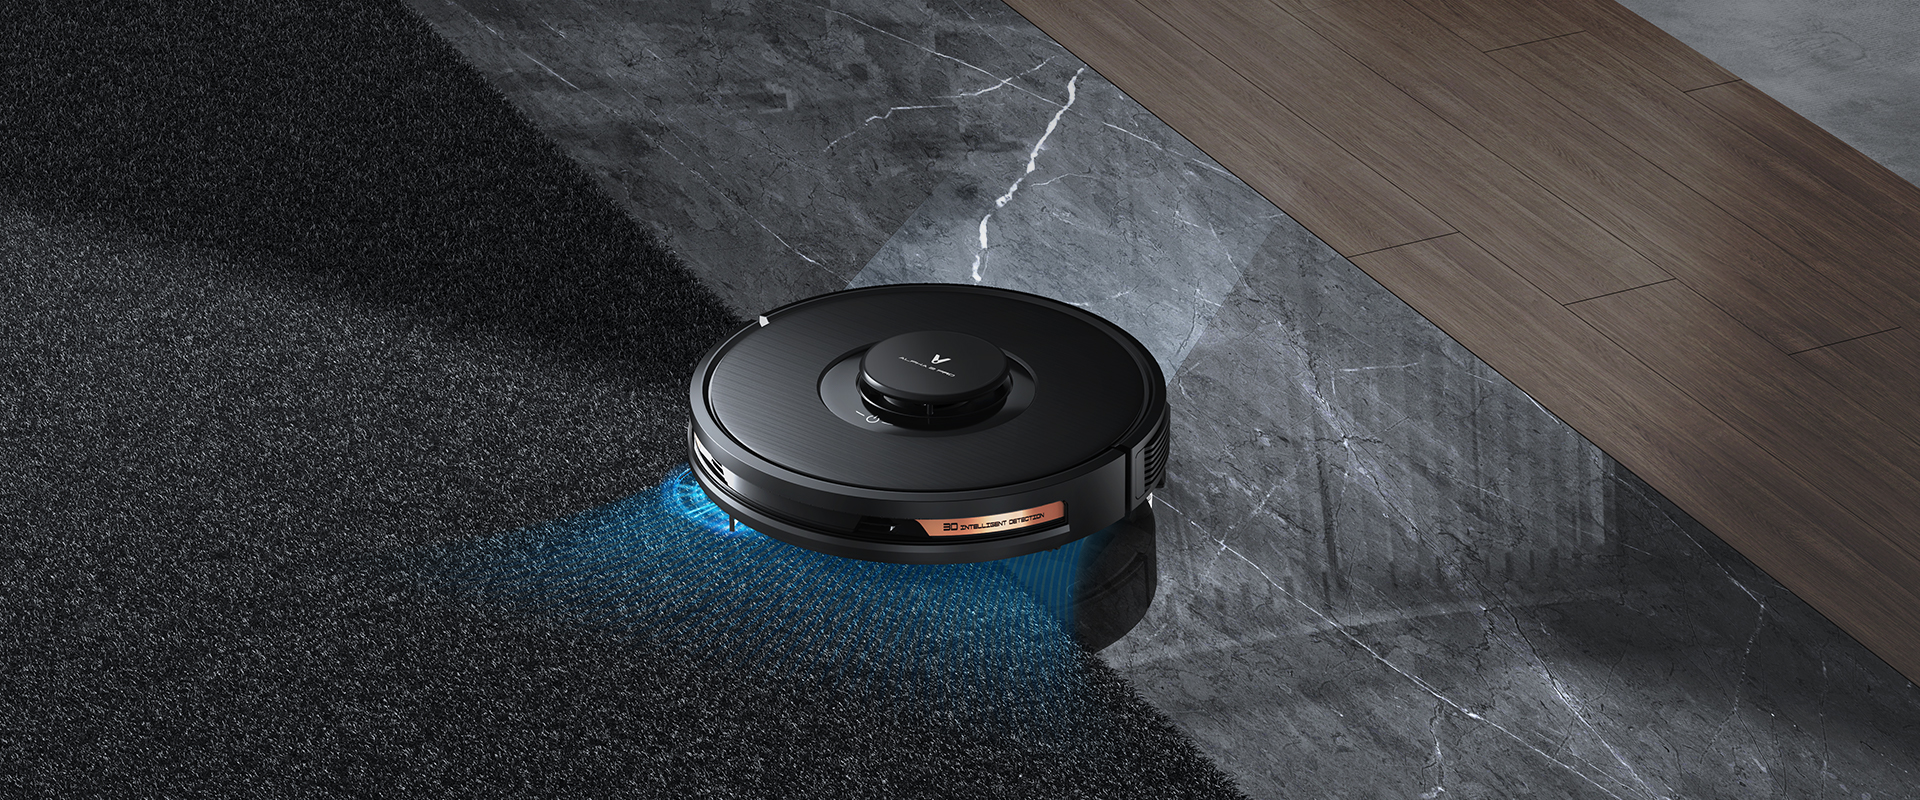 Viomi Alpha 2 Pro, Revolutionary Anti-Collision Cleaning Master - Viomi, Best Robot Vacuum Cleaner and Mop - Viomi 5G IoT Home